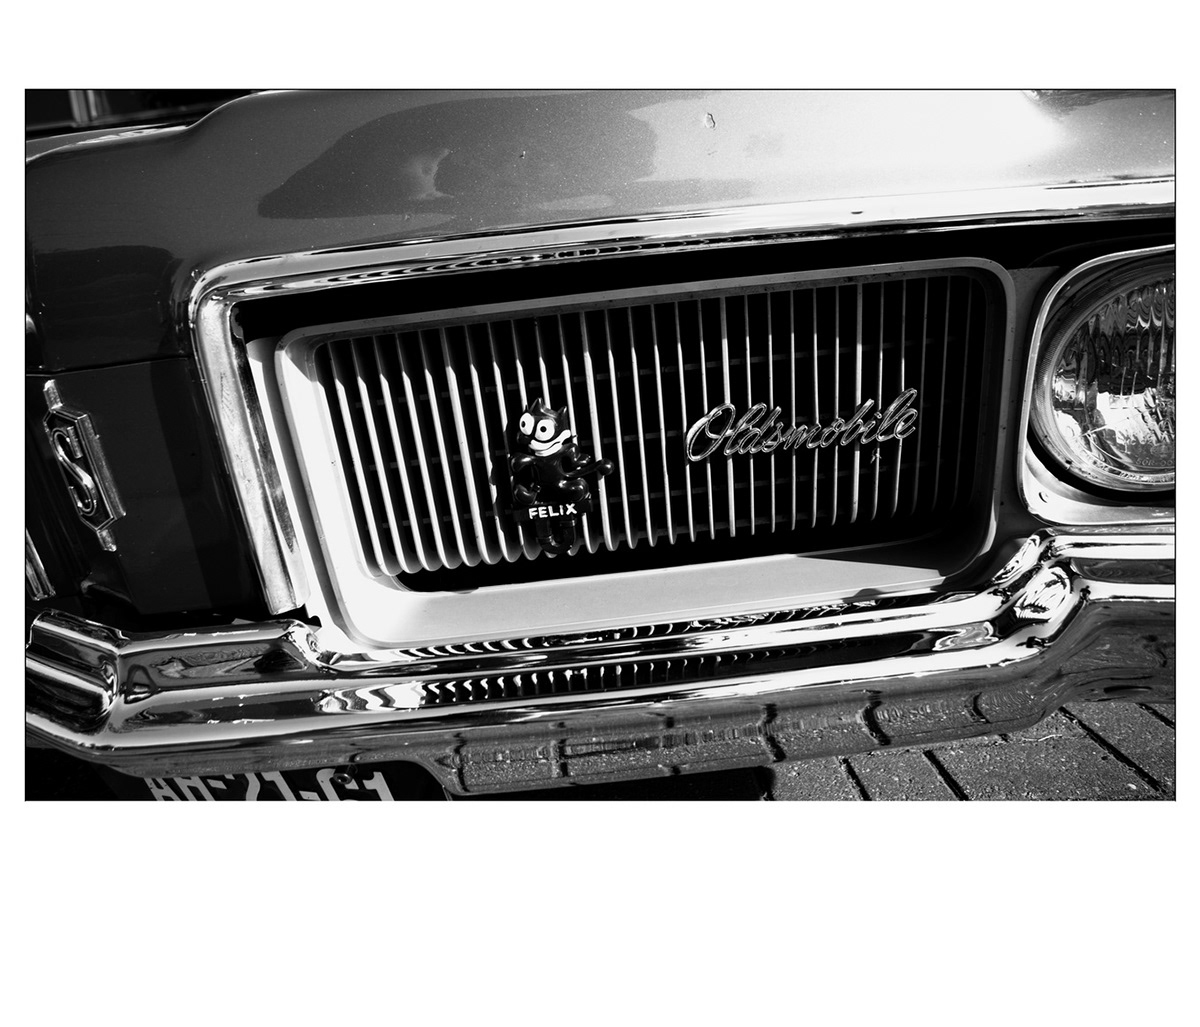 Cars cult power lifestyle wheels americanmuscle blackandwhitephotography cruisebrothers DenHaag oldtimers